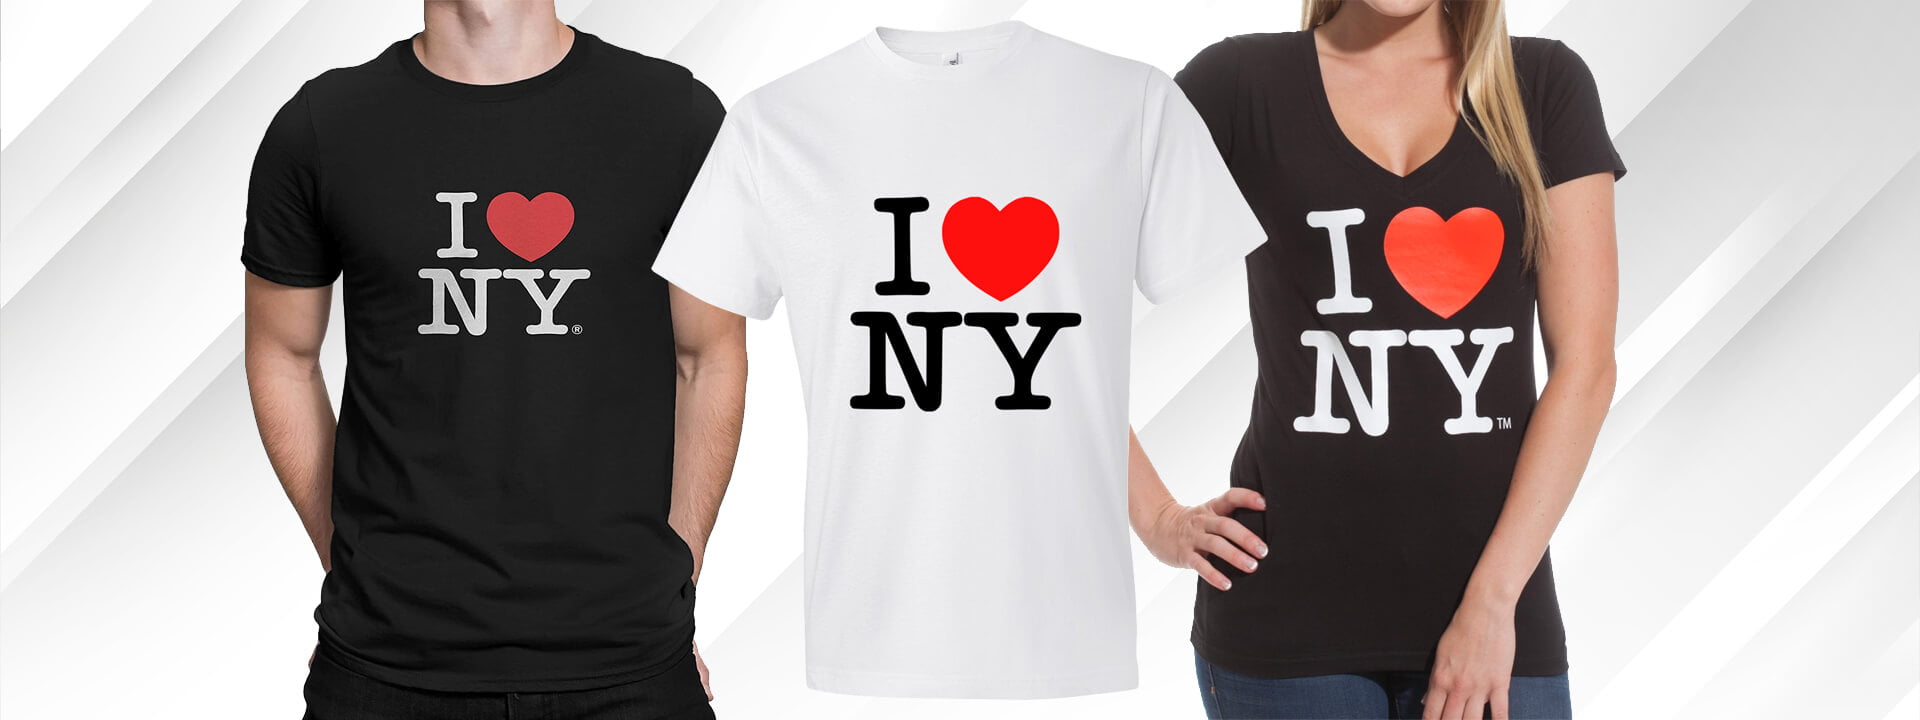 The iconic piece of streetwear, the "I Love New York" shirt. You know the one, that bright red shirt with the big white letters and the heart, it's a classic.